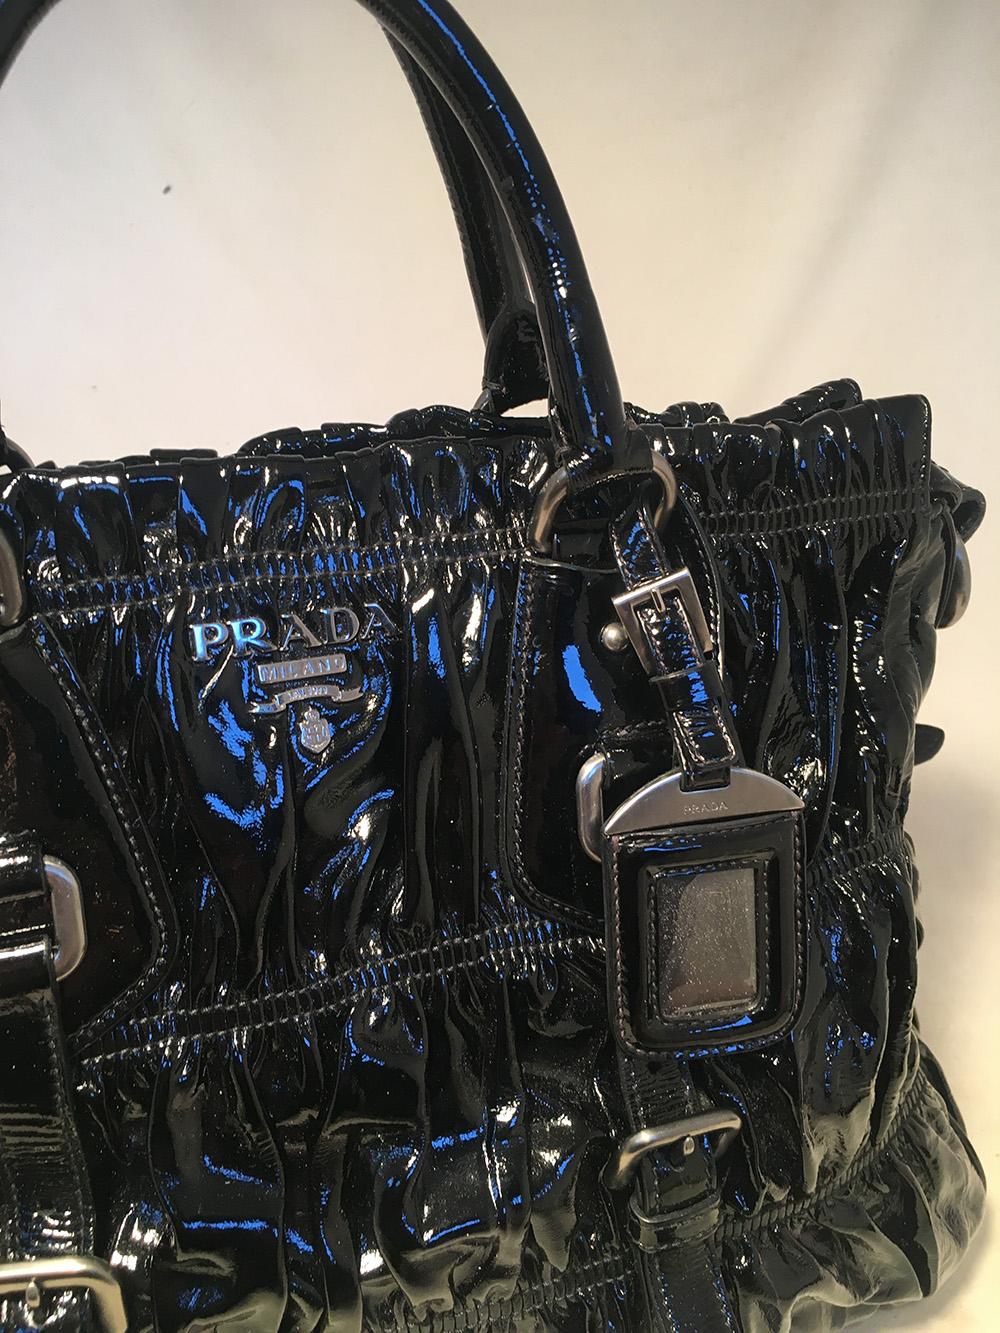 Prada Black Patent Leather Gaufre Ruched Shoulder Bag Tote In Excellent Condition For Sale In Philadelphia, PA